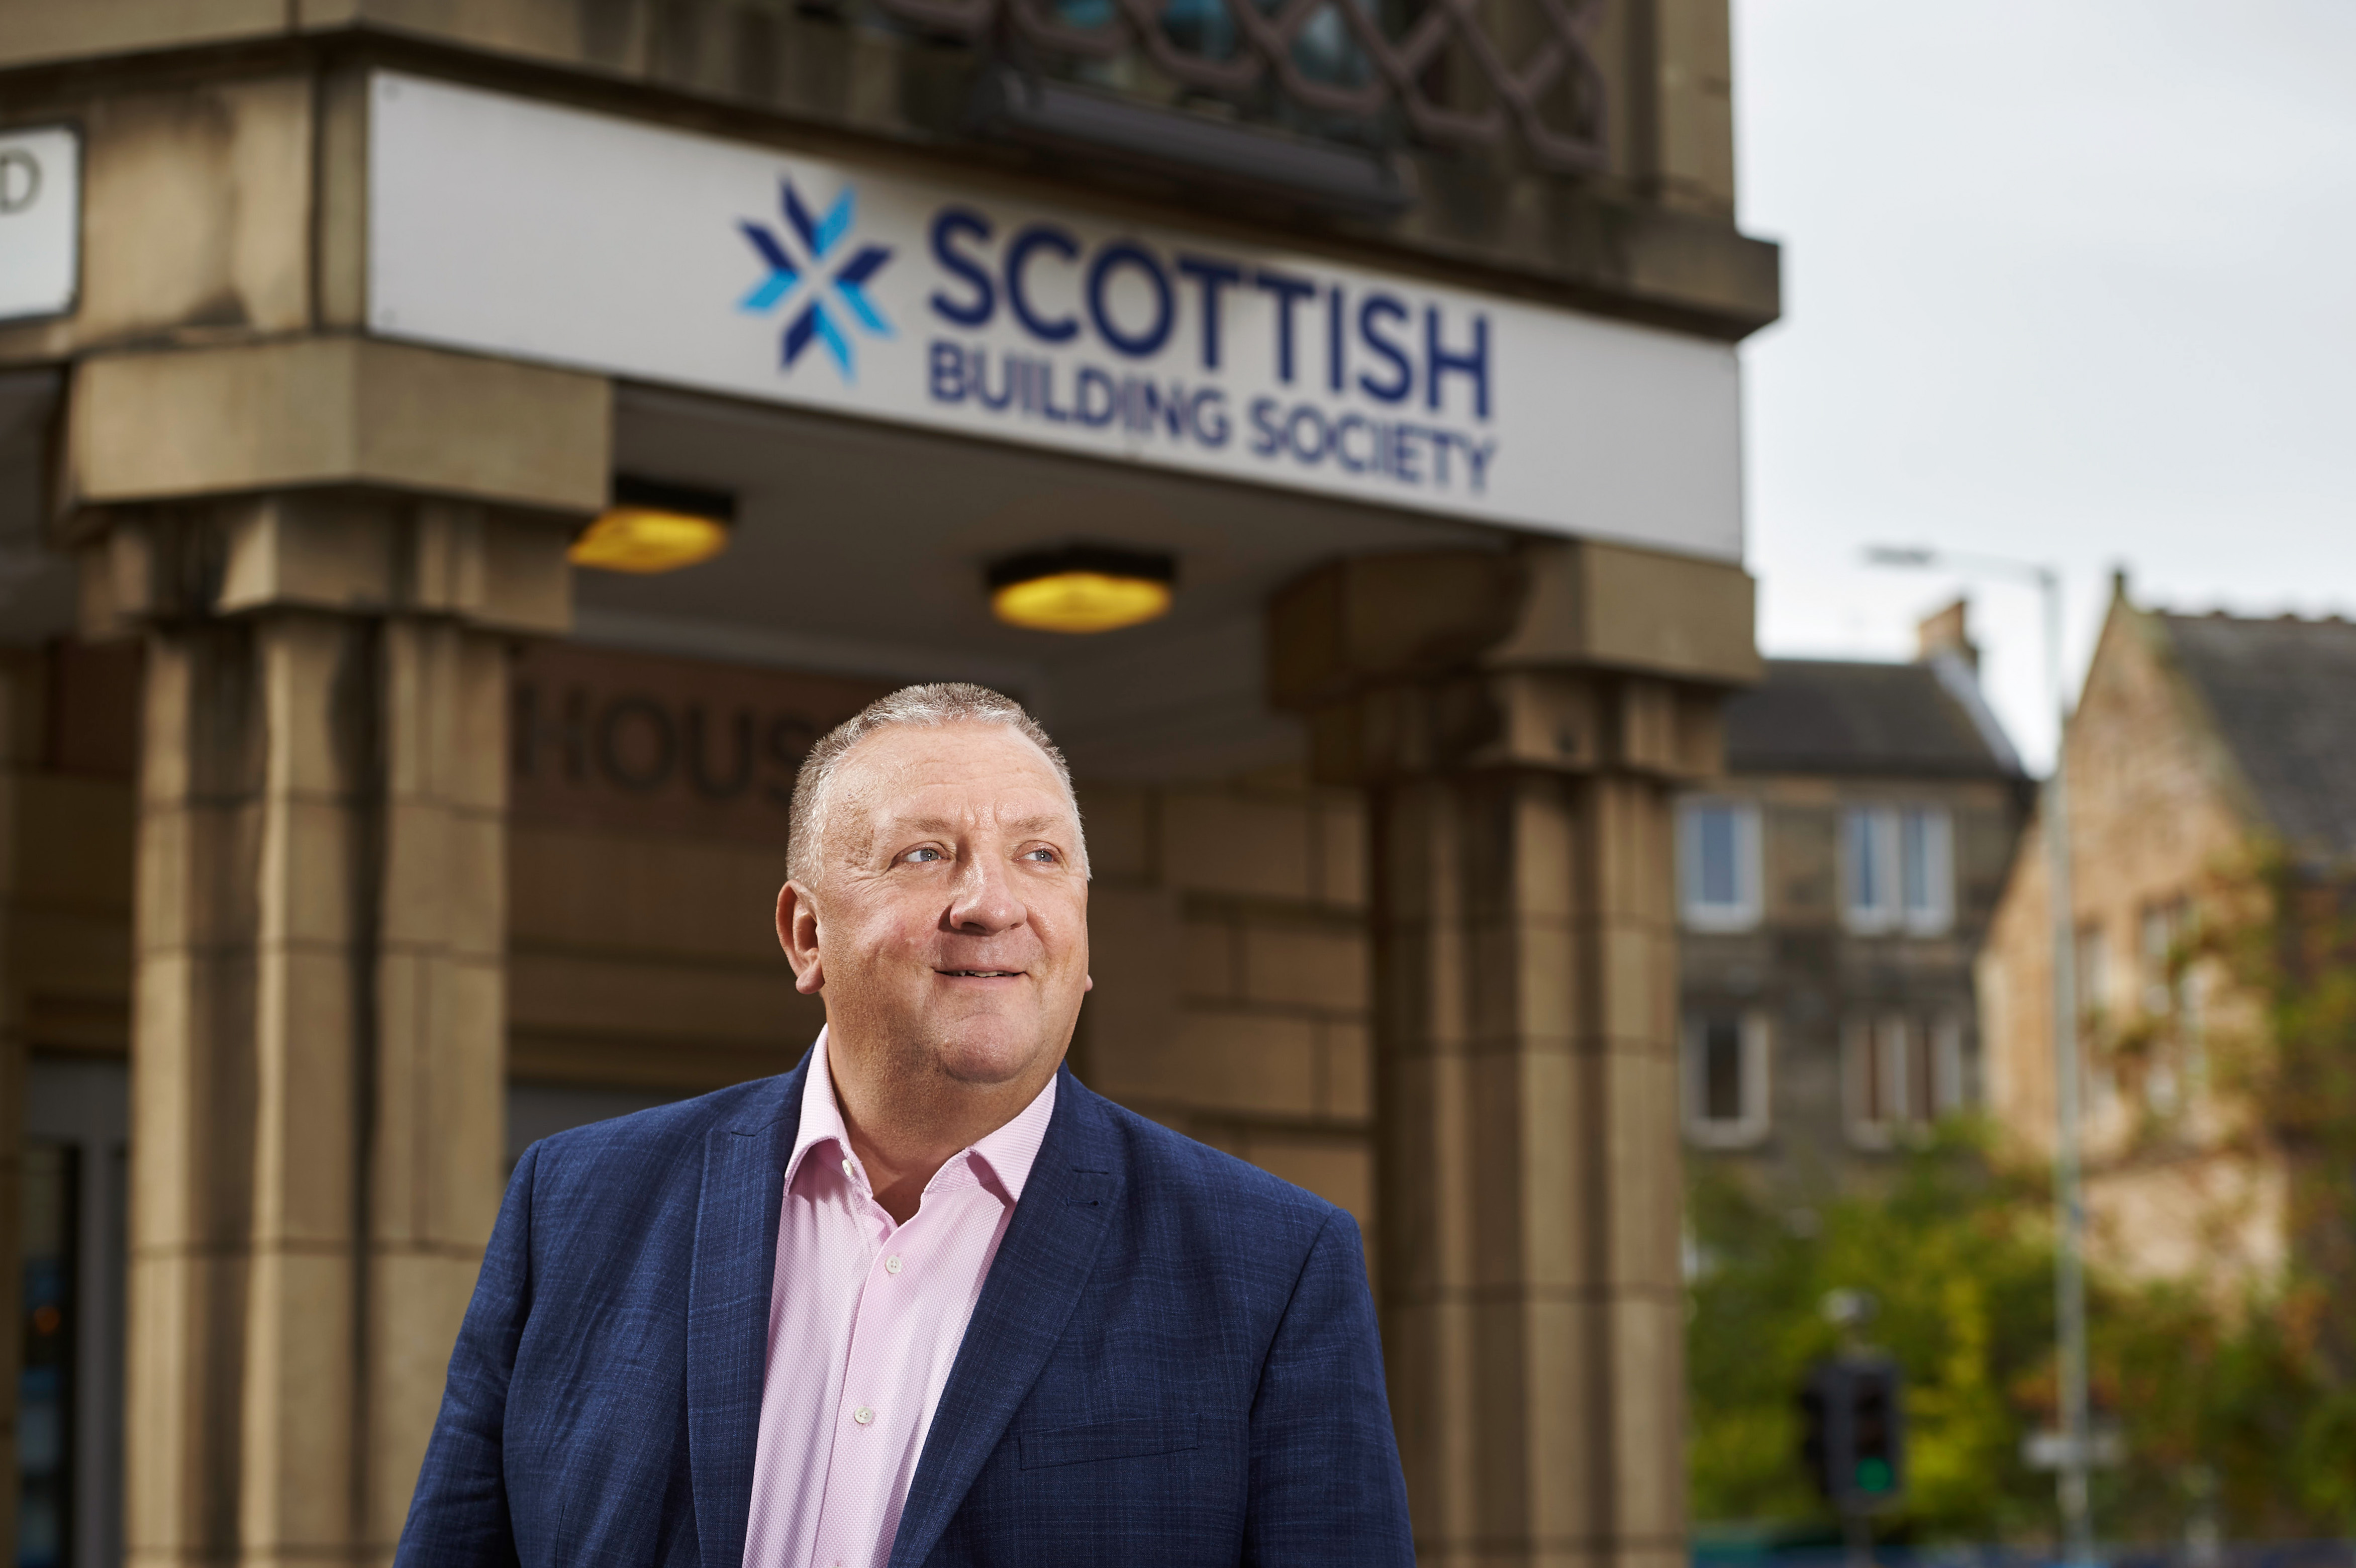 Scottish Building Society sees record increases in mortgage lending and savings balances